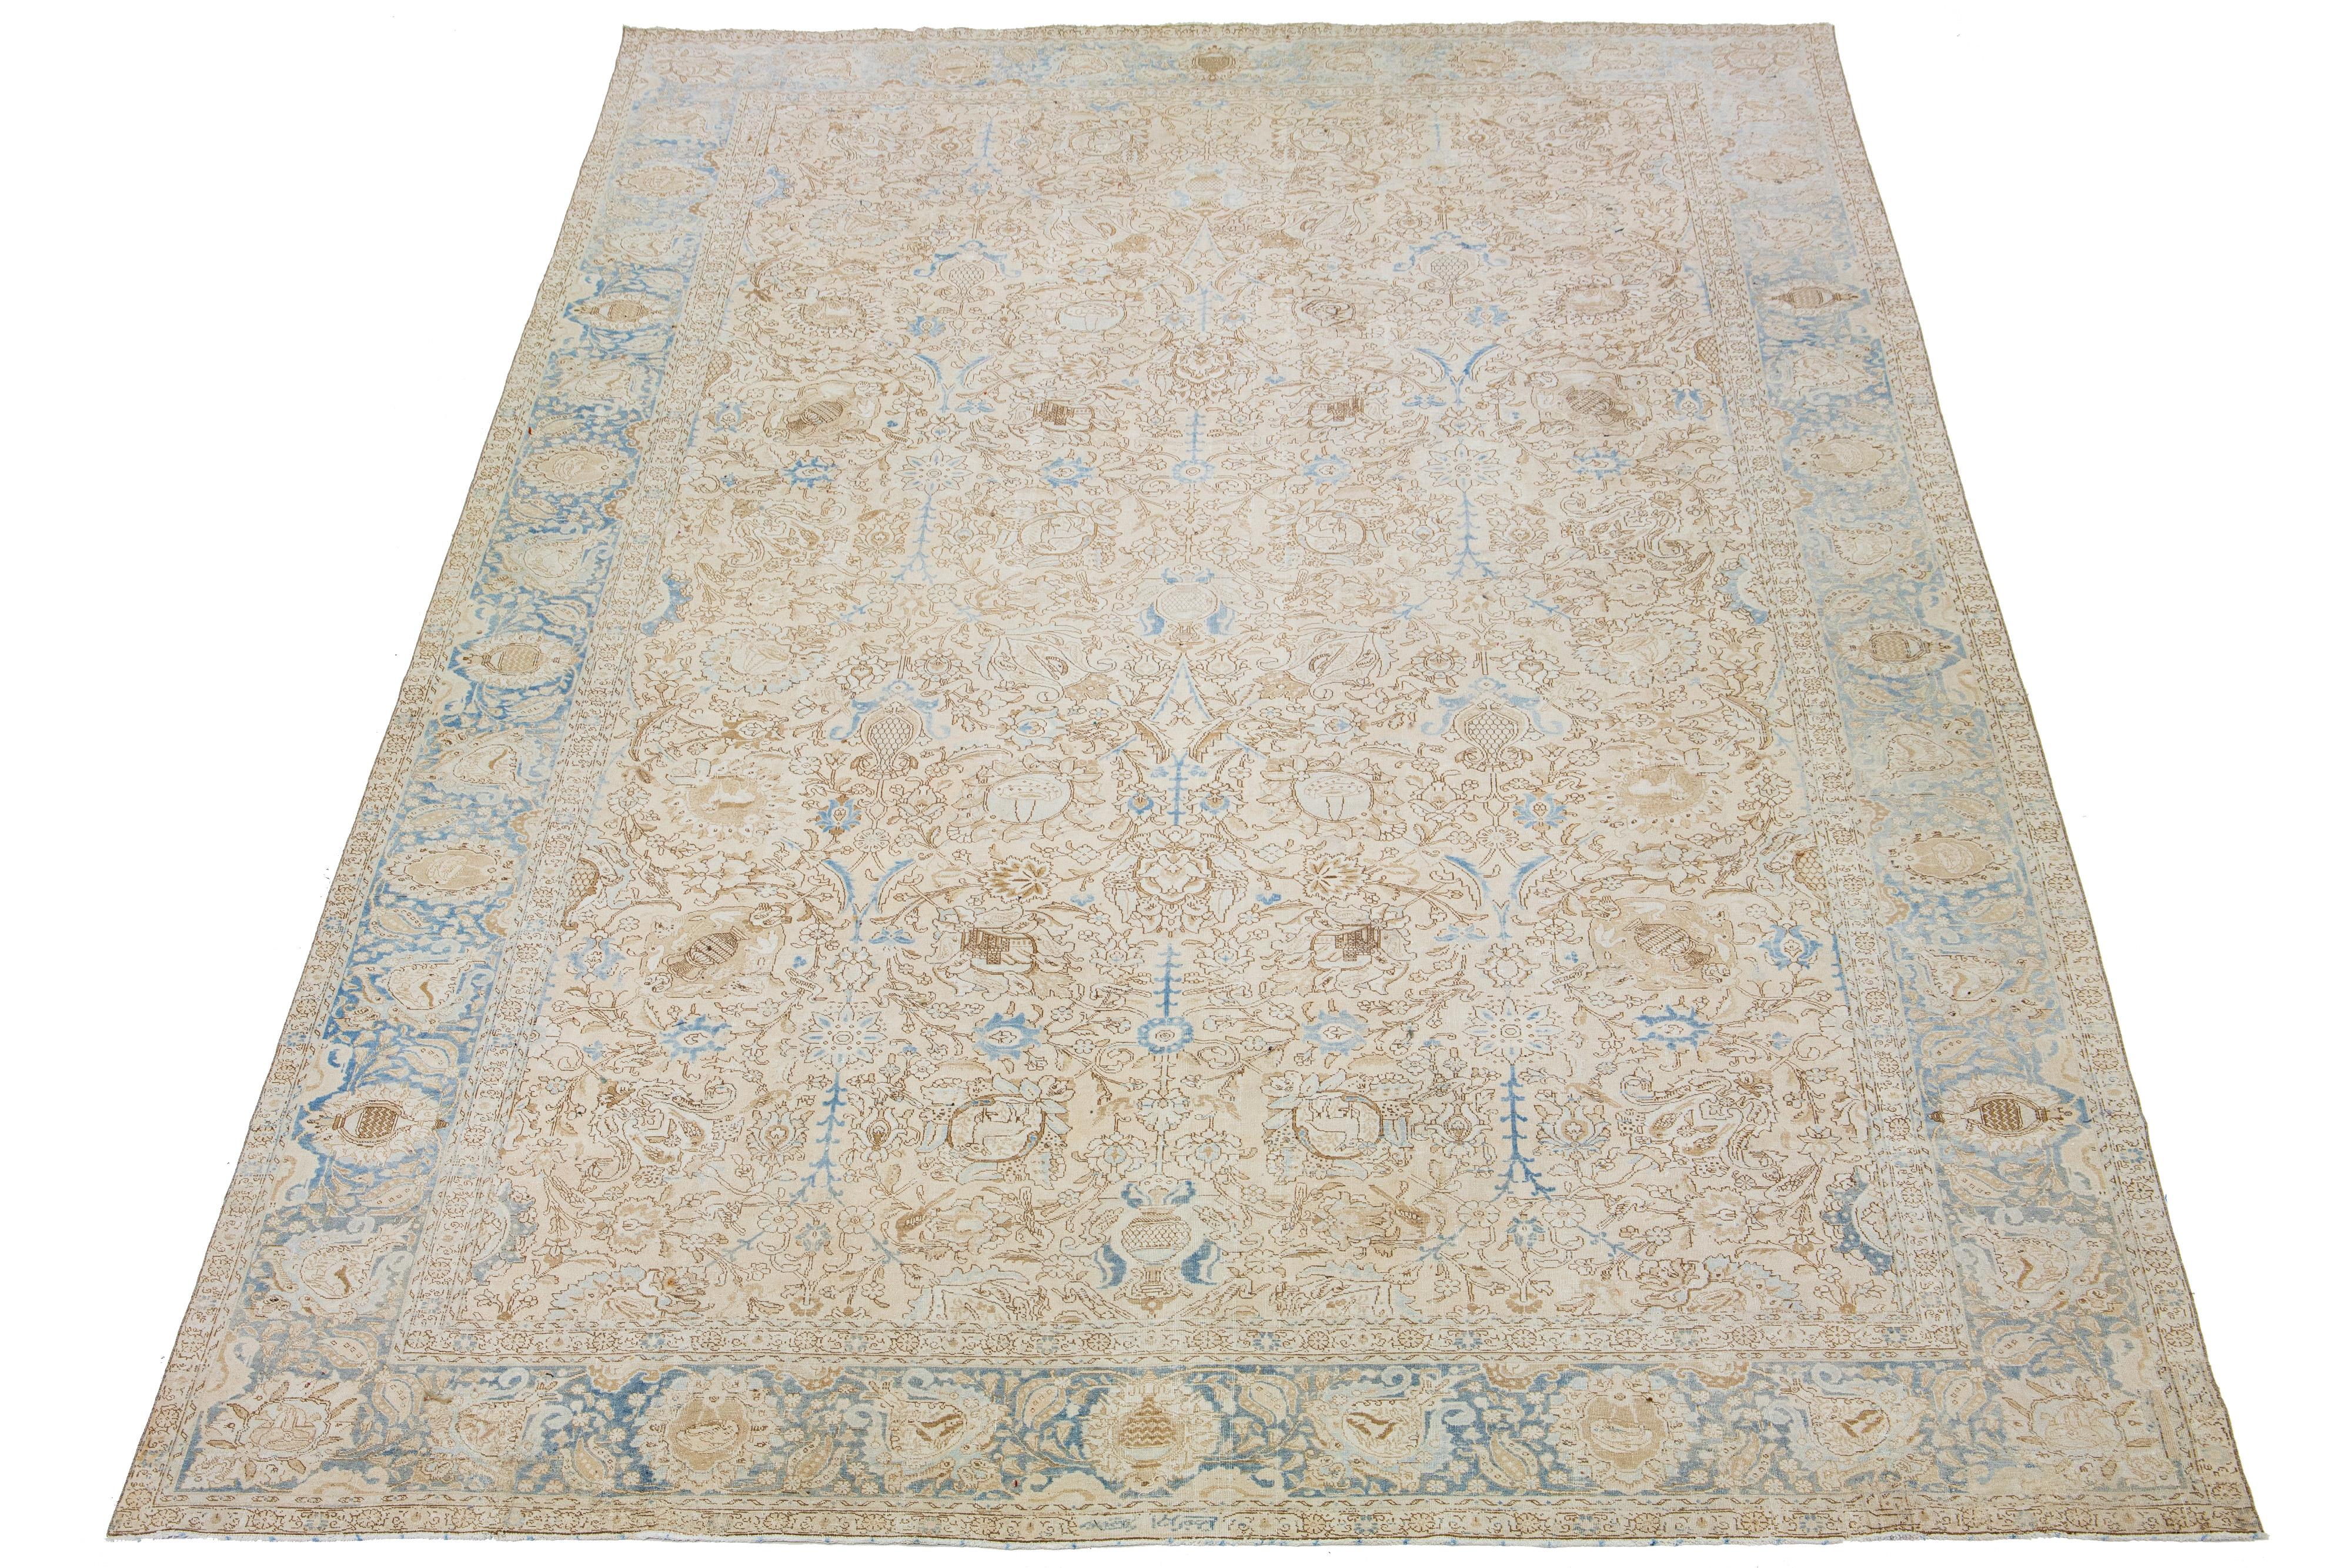 This handcrafted Persian Tabriz wool rug showcases a traditional floral pattern. The contrast between the beige backdrop emphasizes the brown and blue floral design.

This rug measures 11'1